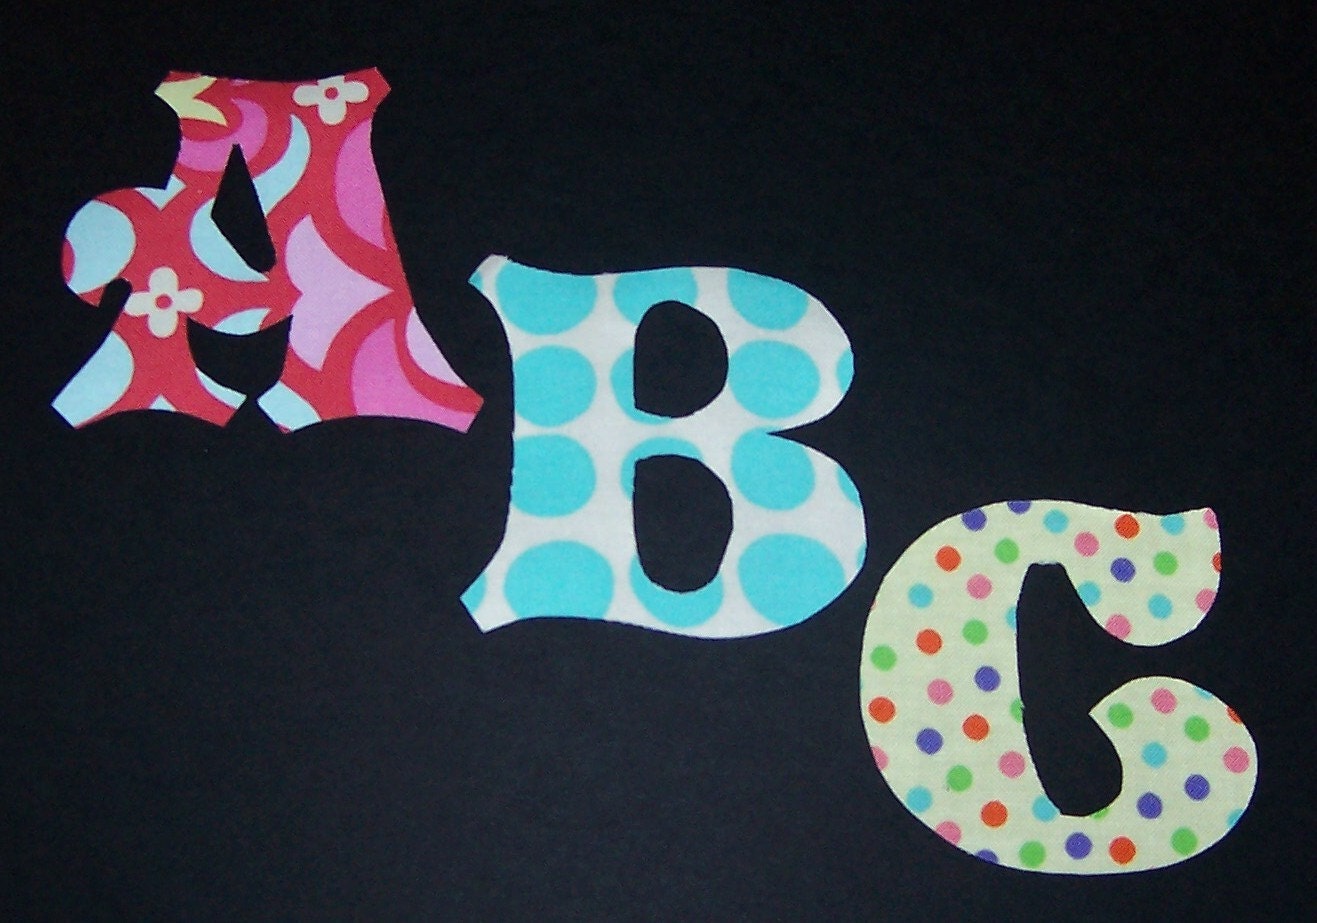 fabric-applique-patterns-only-alphabet-letters-full-set